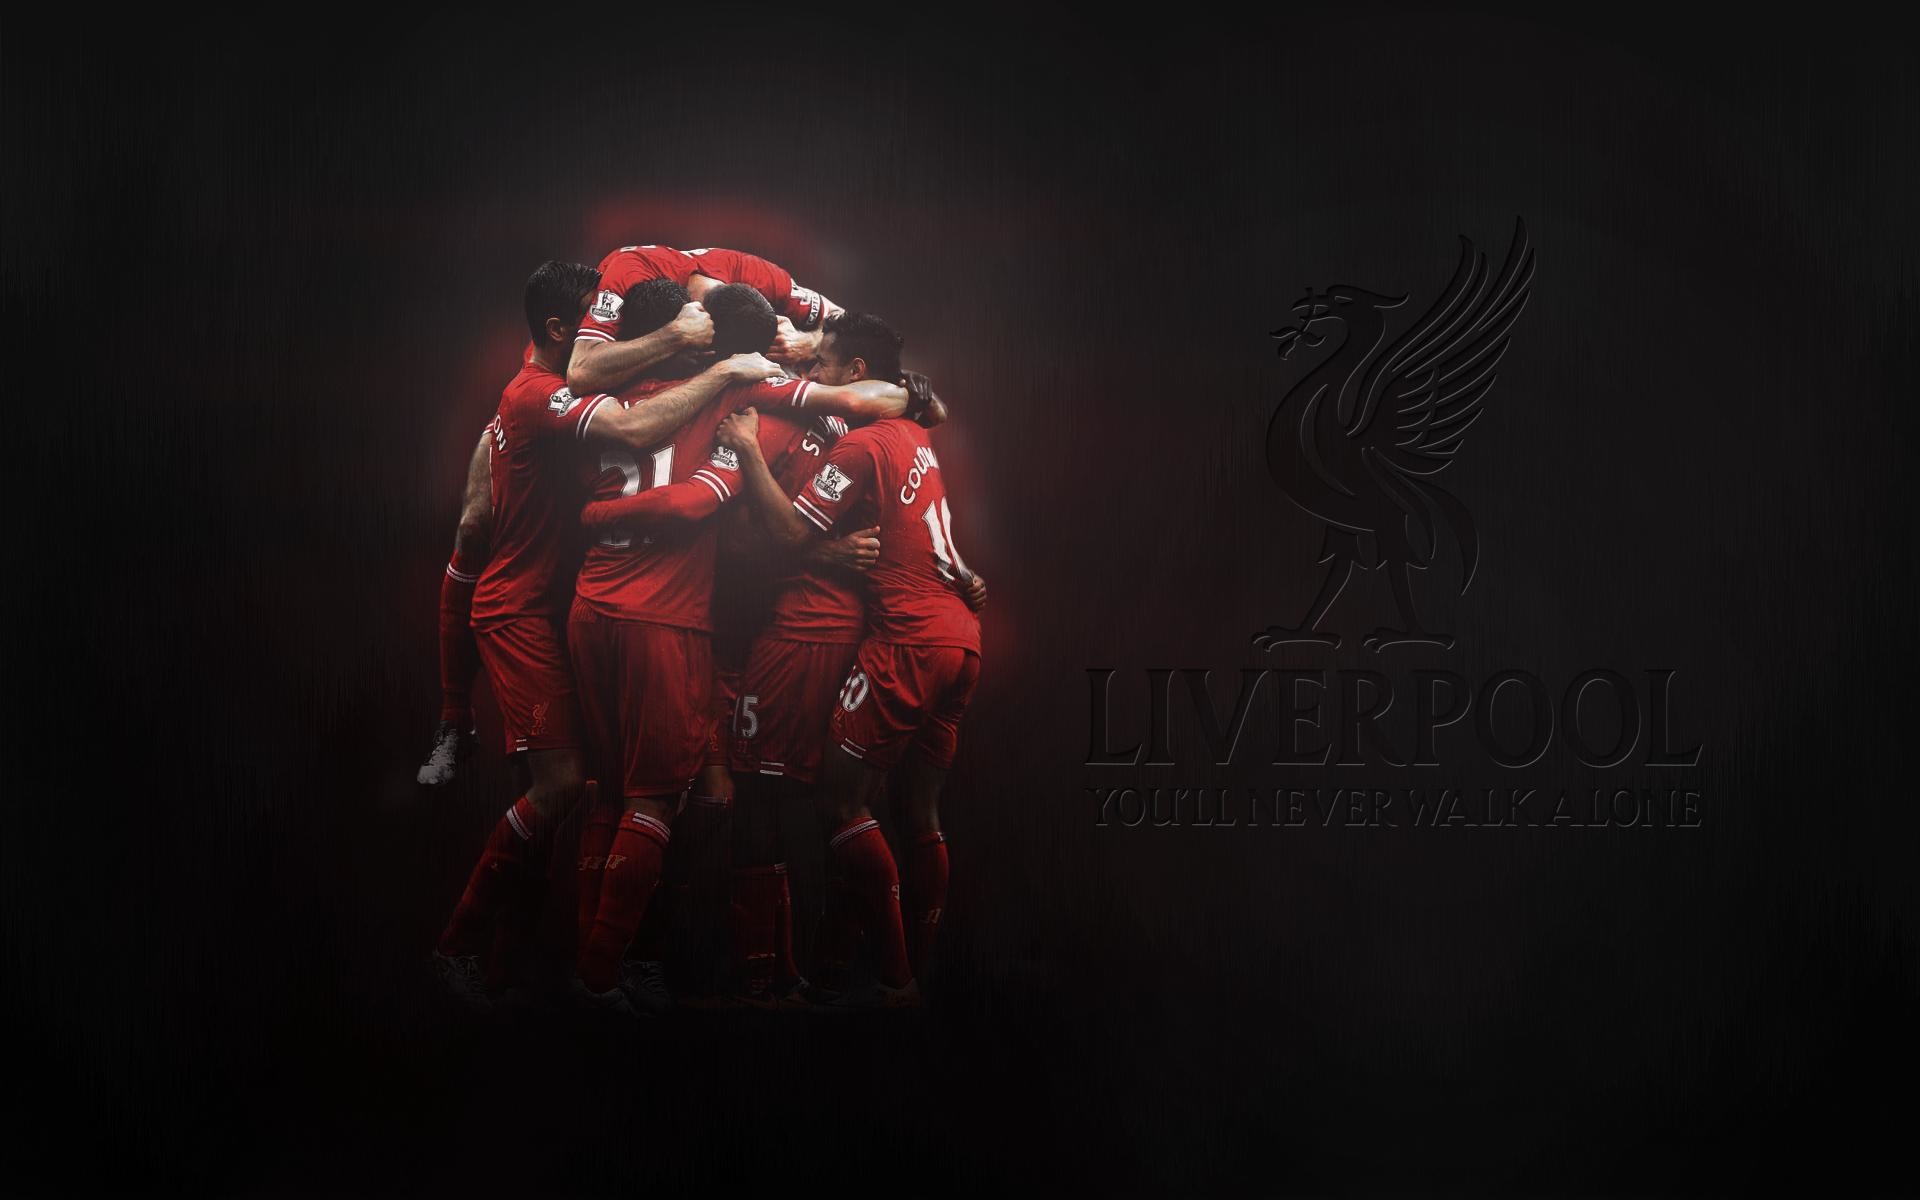 1920x1200 Liverpool Wallpapers Widescreen On Wallpaper Hd 1920 x 1200 px 692.31 KB  red iphone 2016 high